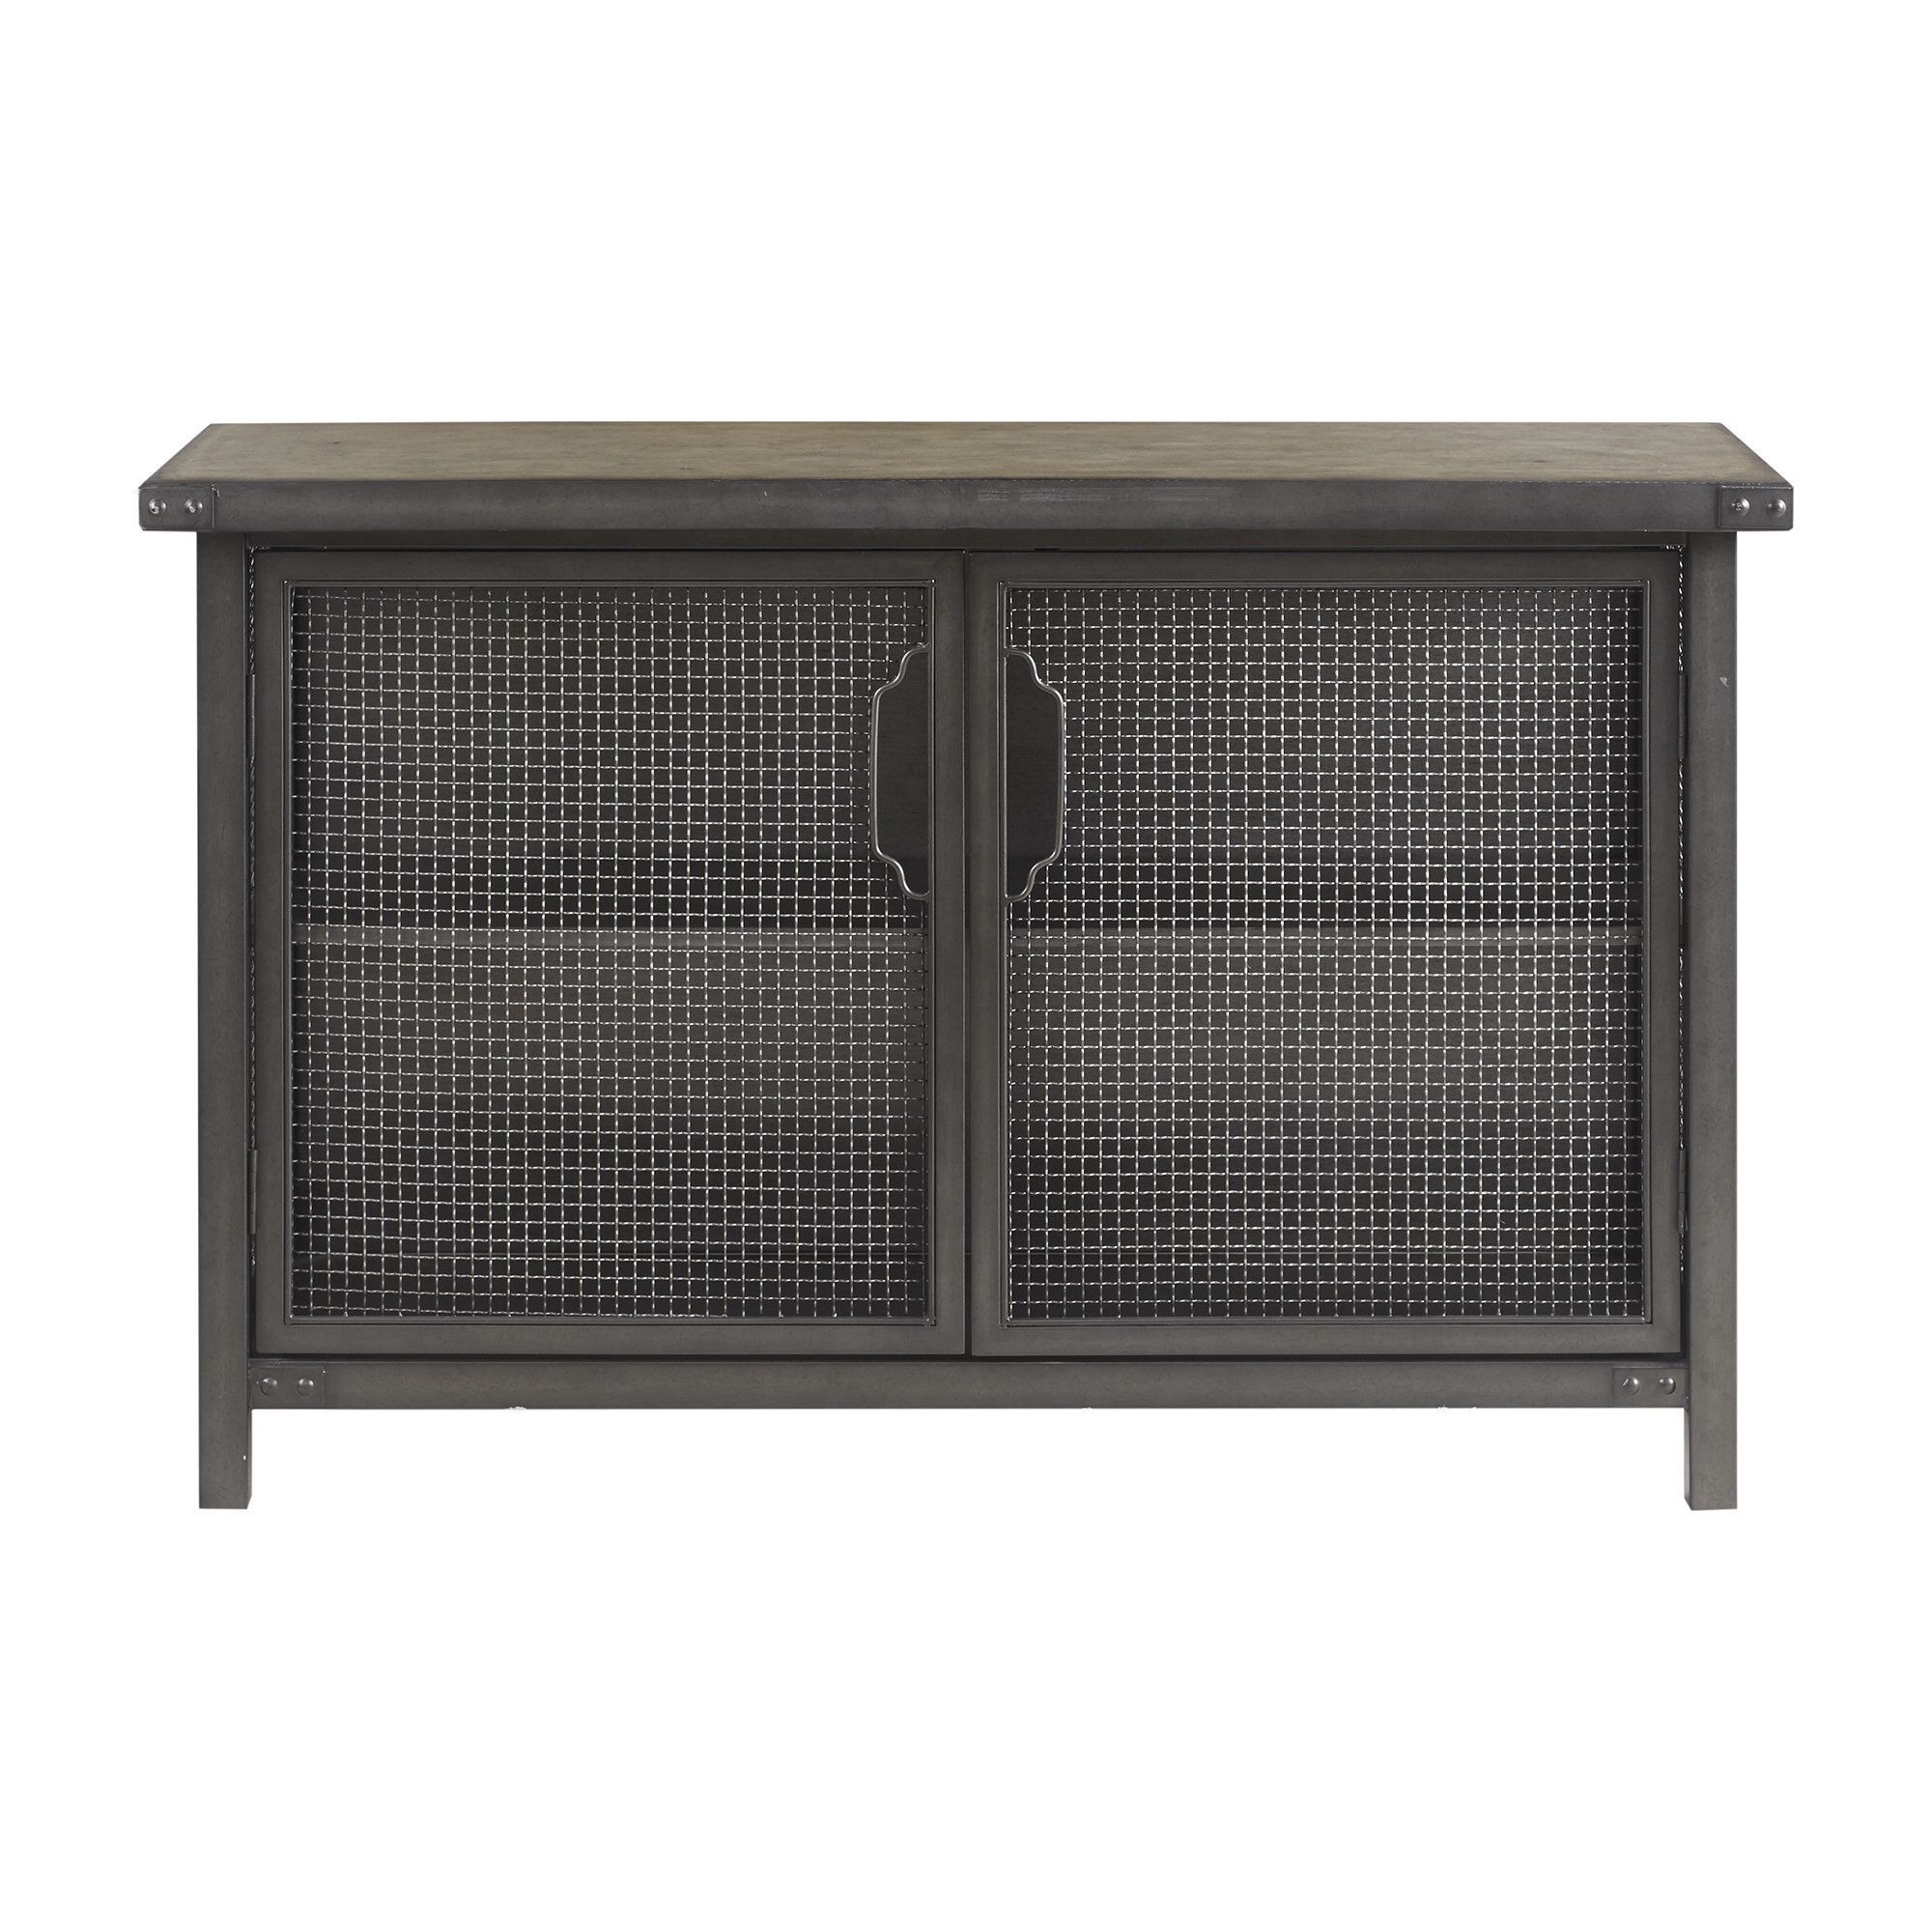 Casolino Sideboard | Dawn | Sideboard, Sideboard Cabinet Intended For Recent Mauzy Sideboards (View 18 of 20)